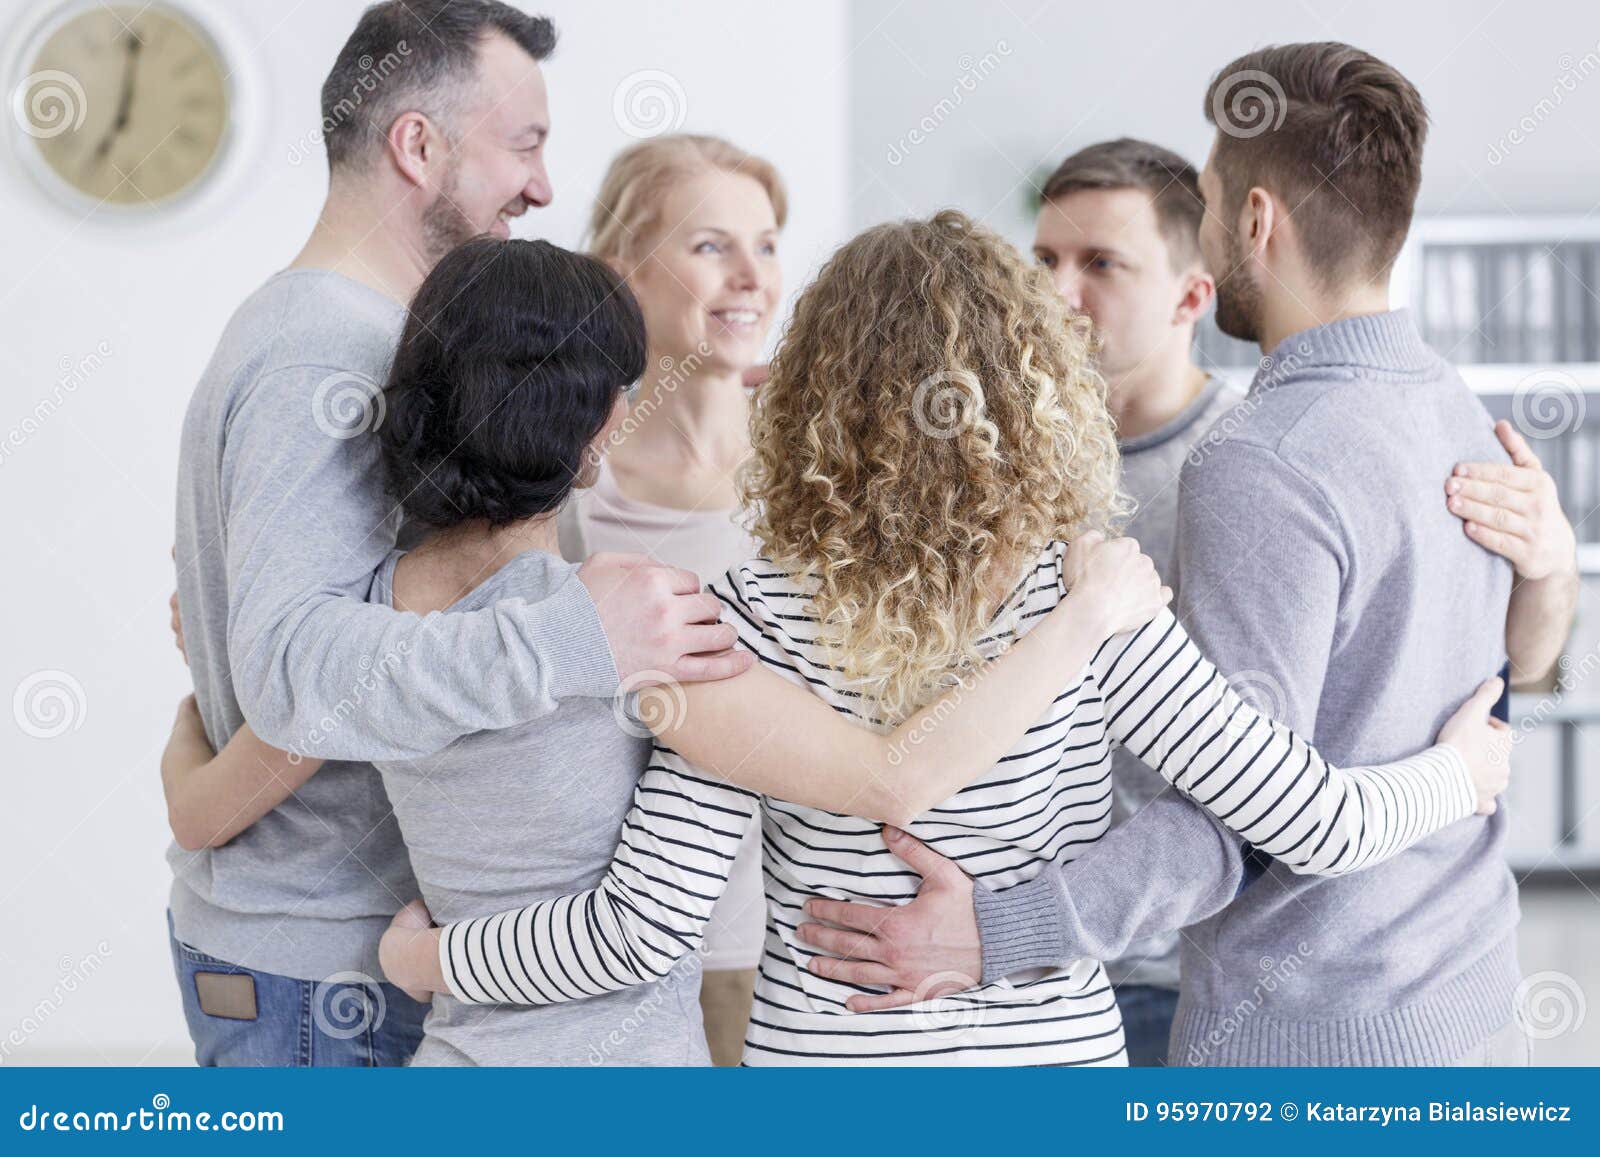 group hug during therapy